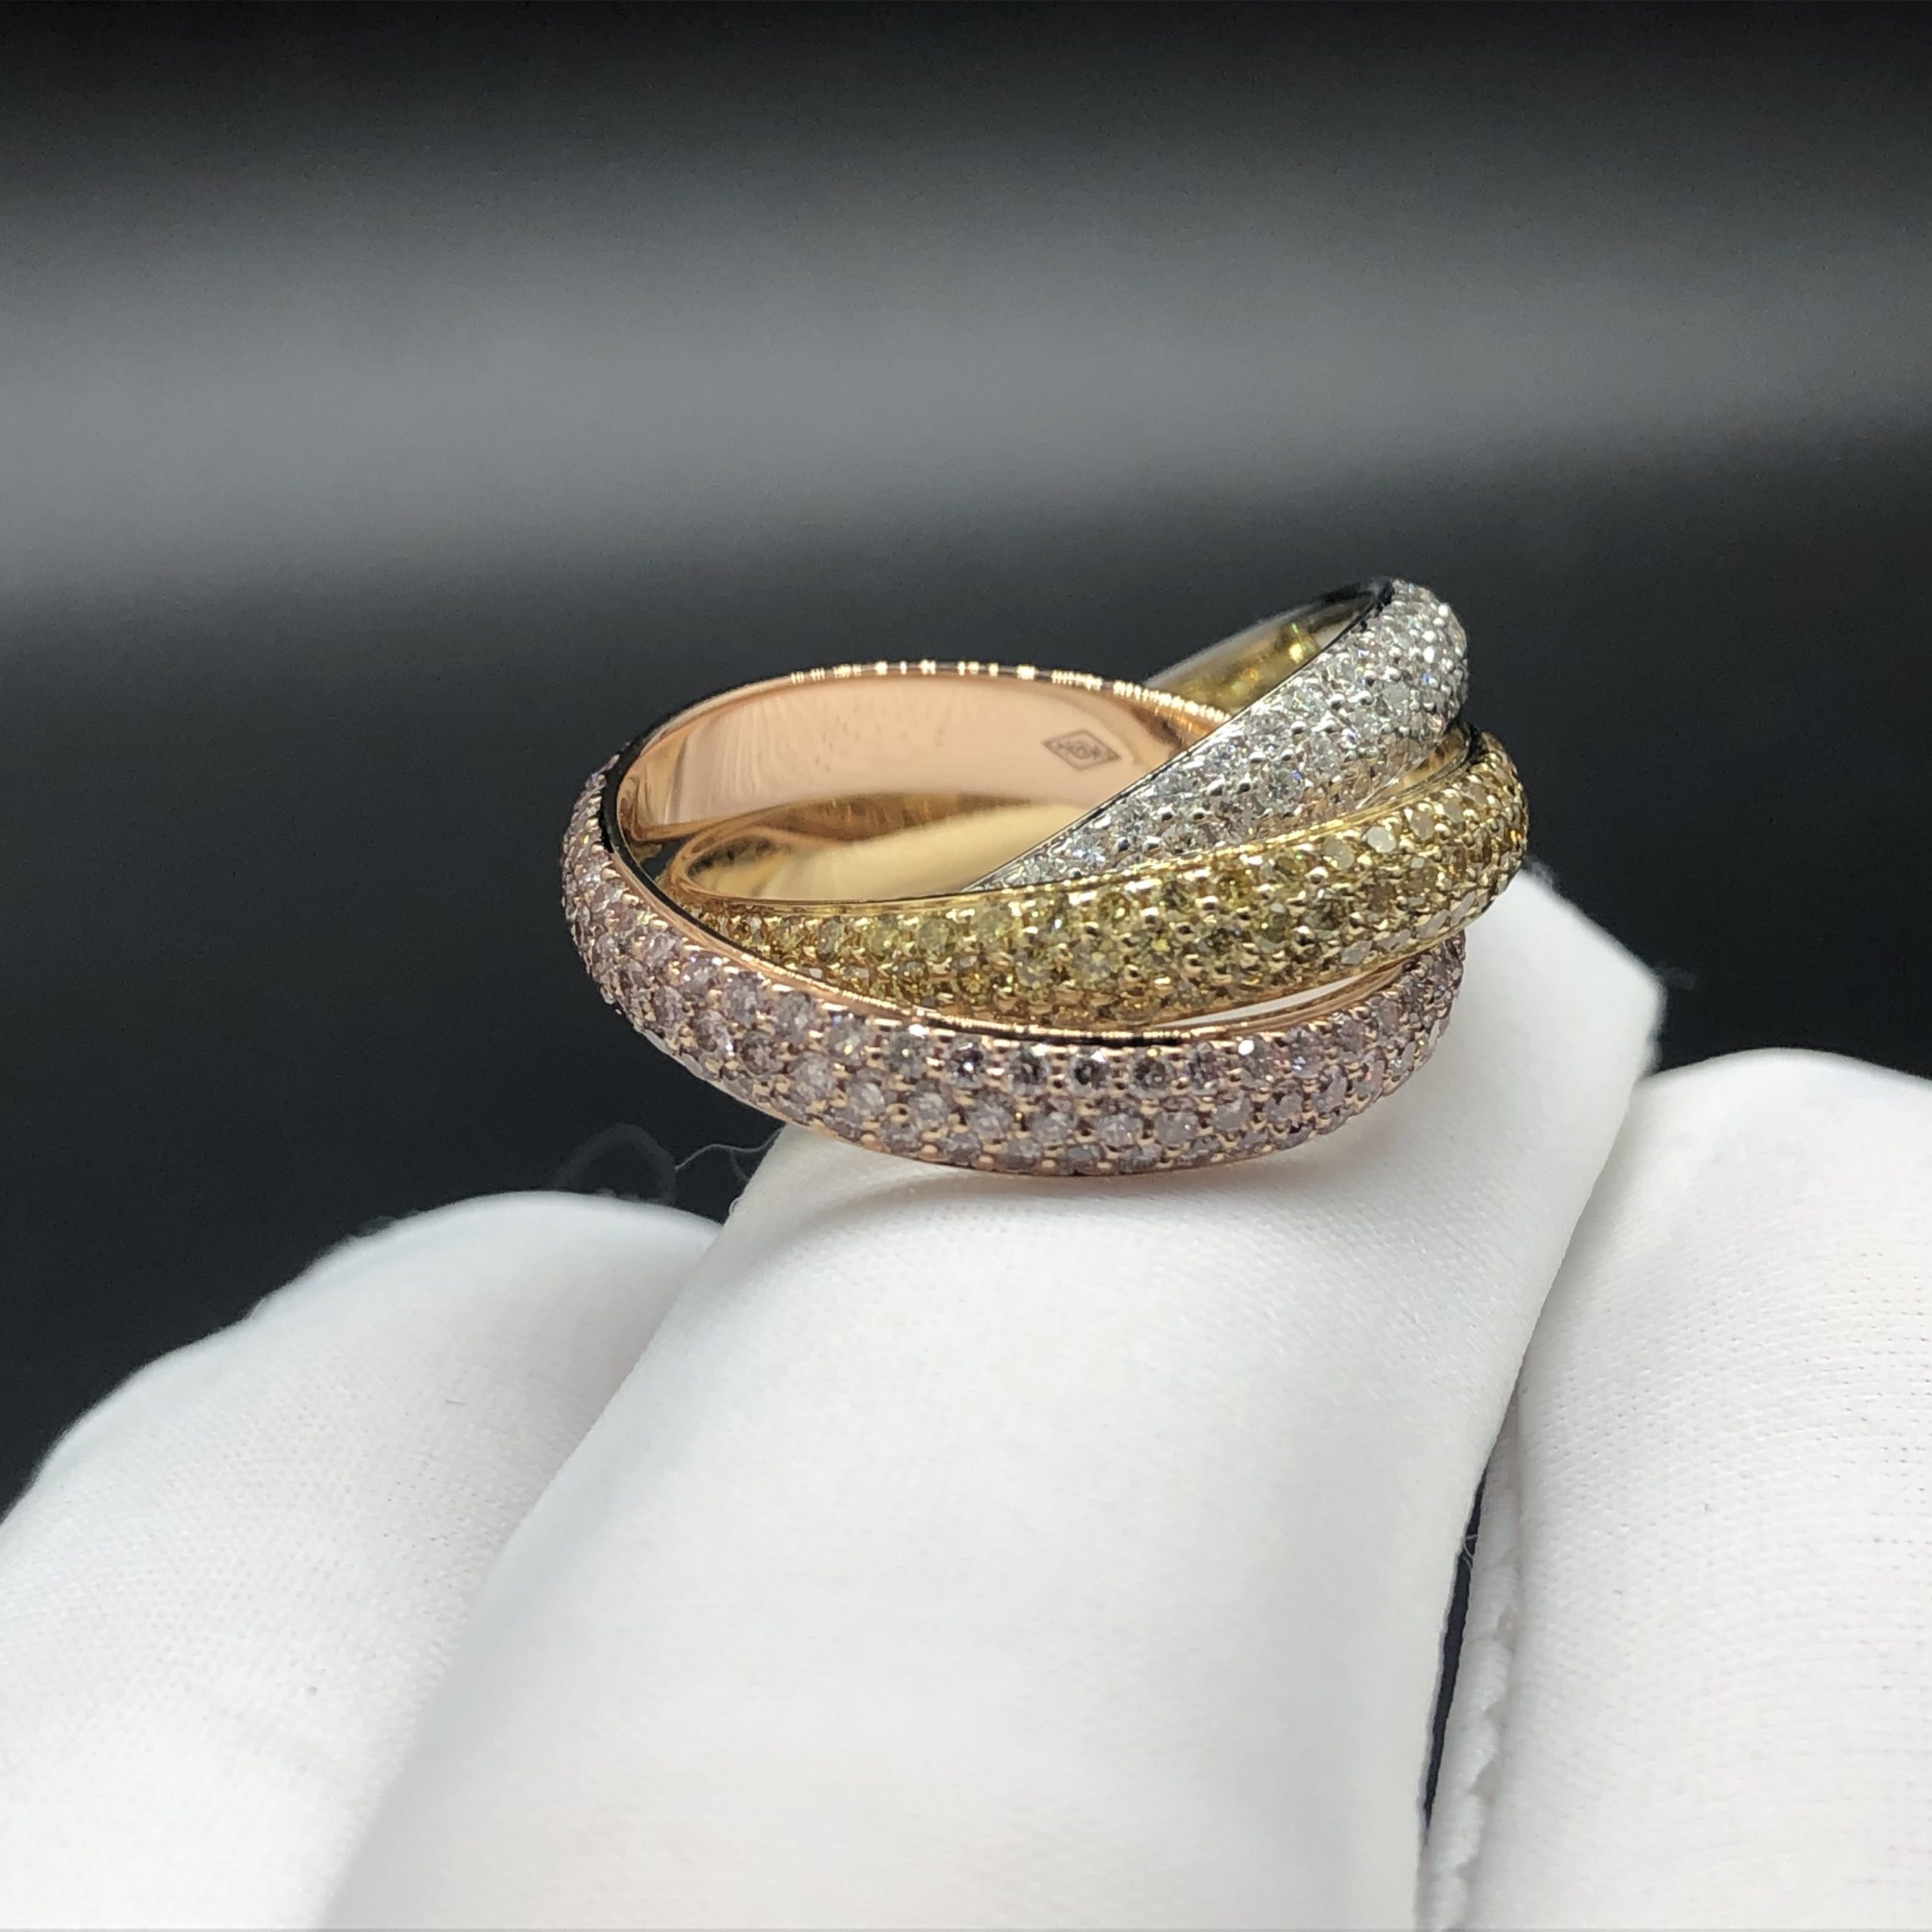 Custom Made Cartier Trinity Ring in 18K Yellow Gold,18K Rose Gold,18K White Gold and Diamond-paved